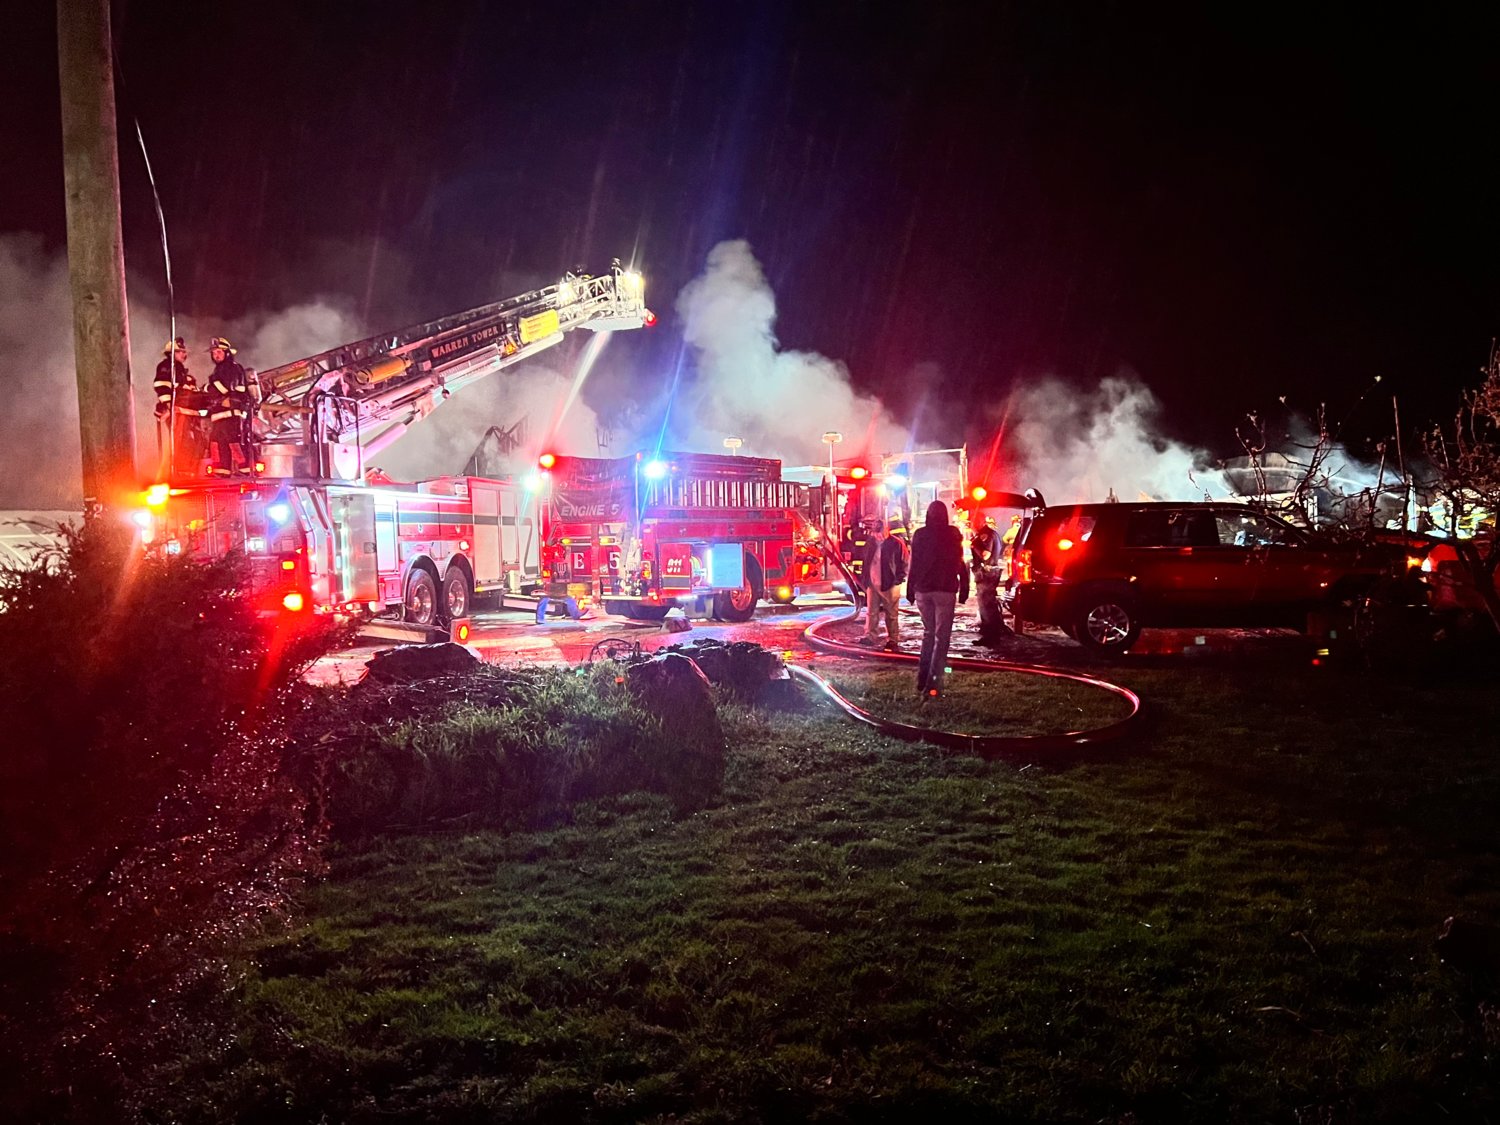 Warren Fire Department apparatus battled the fire in Touisset on Saturday night and into the morning of Sunday, April 17.